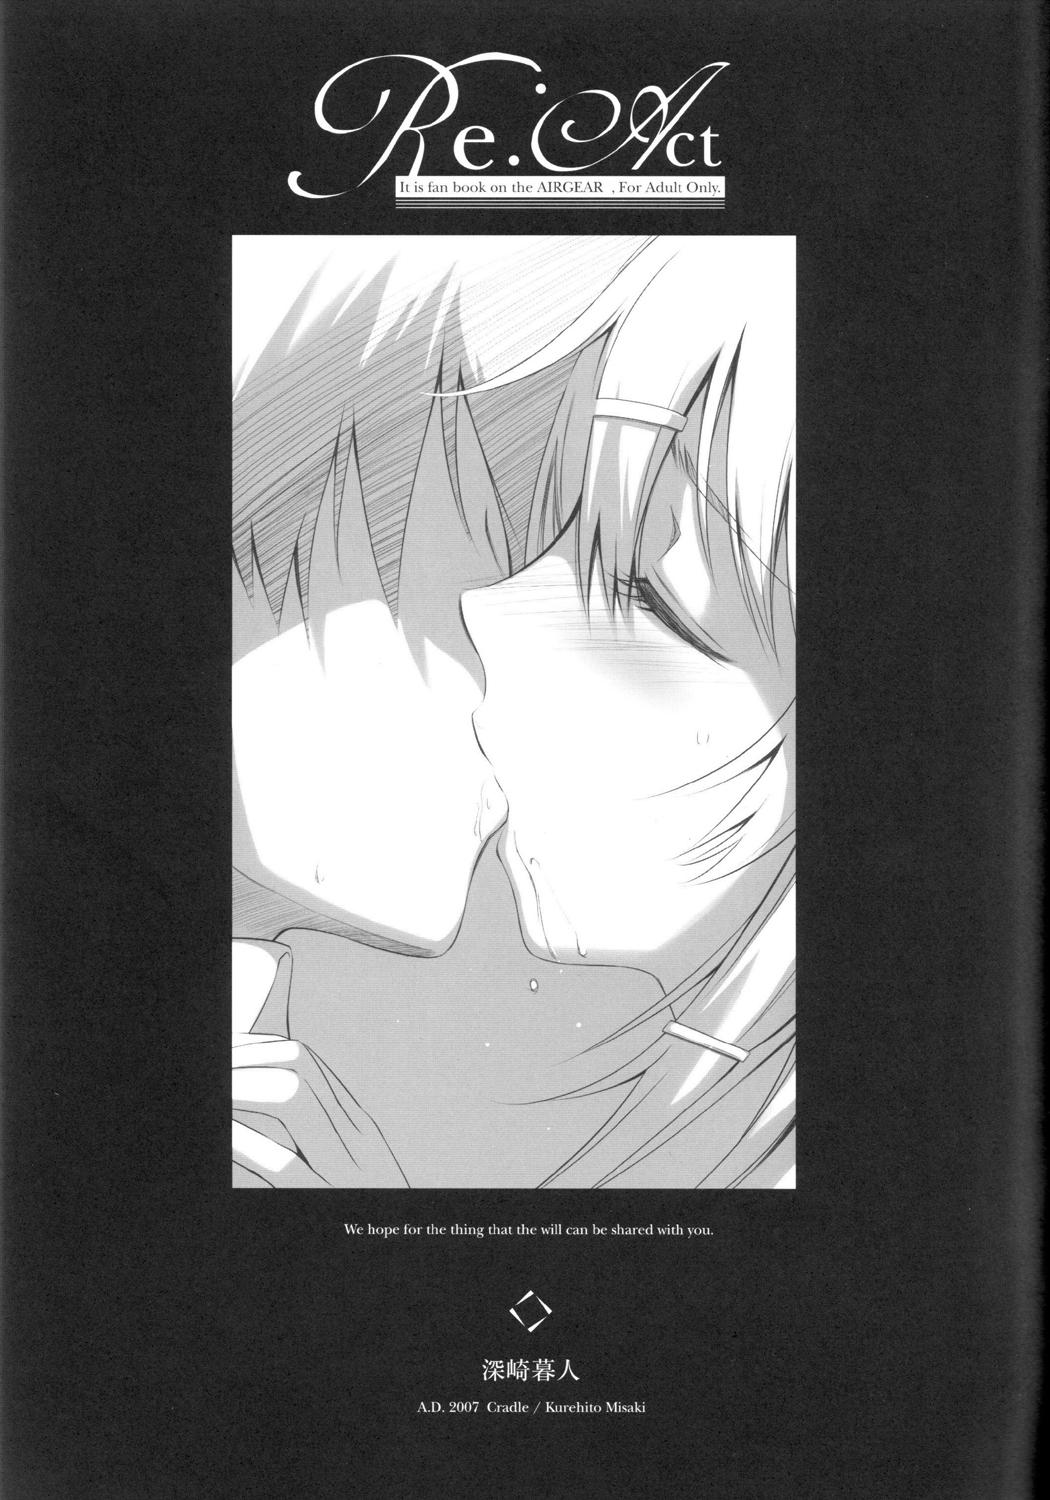 Young Re:Act - Air gear Gay Oralsex - Page 4